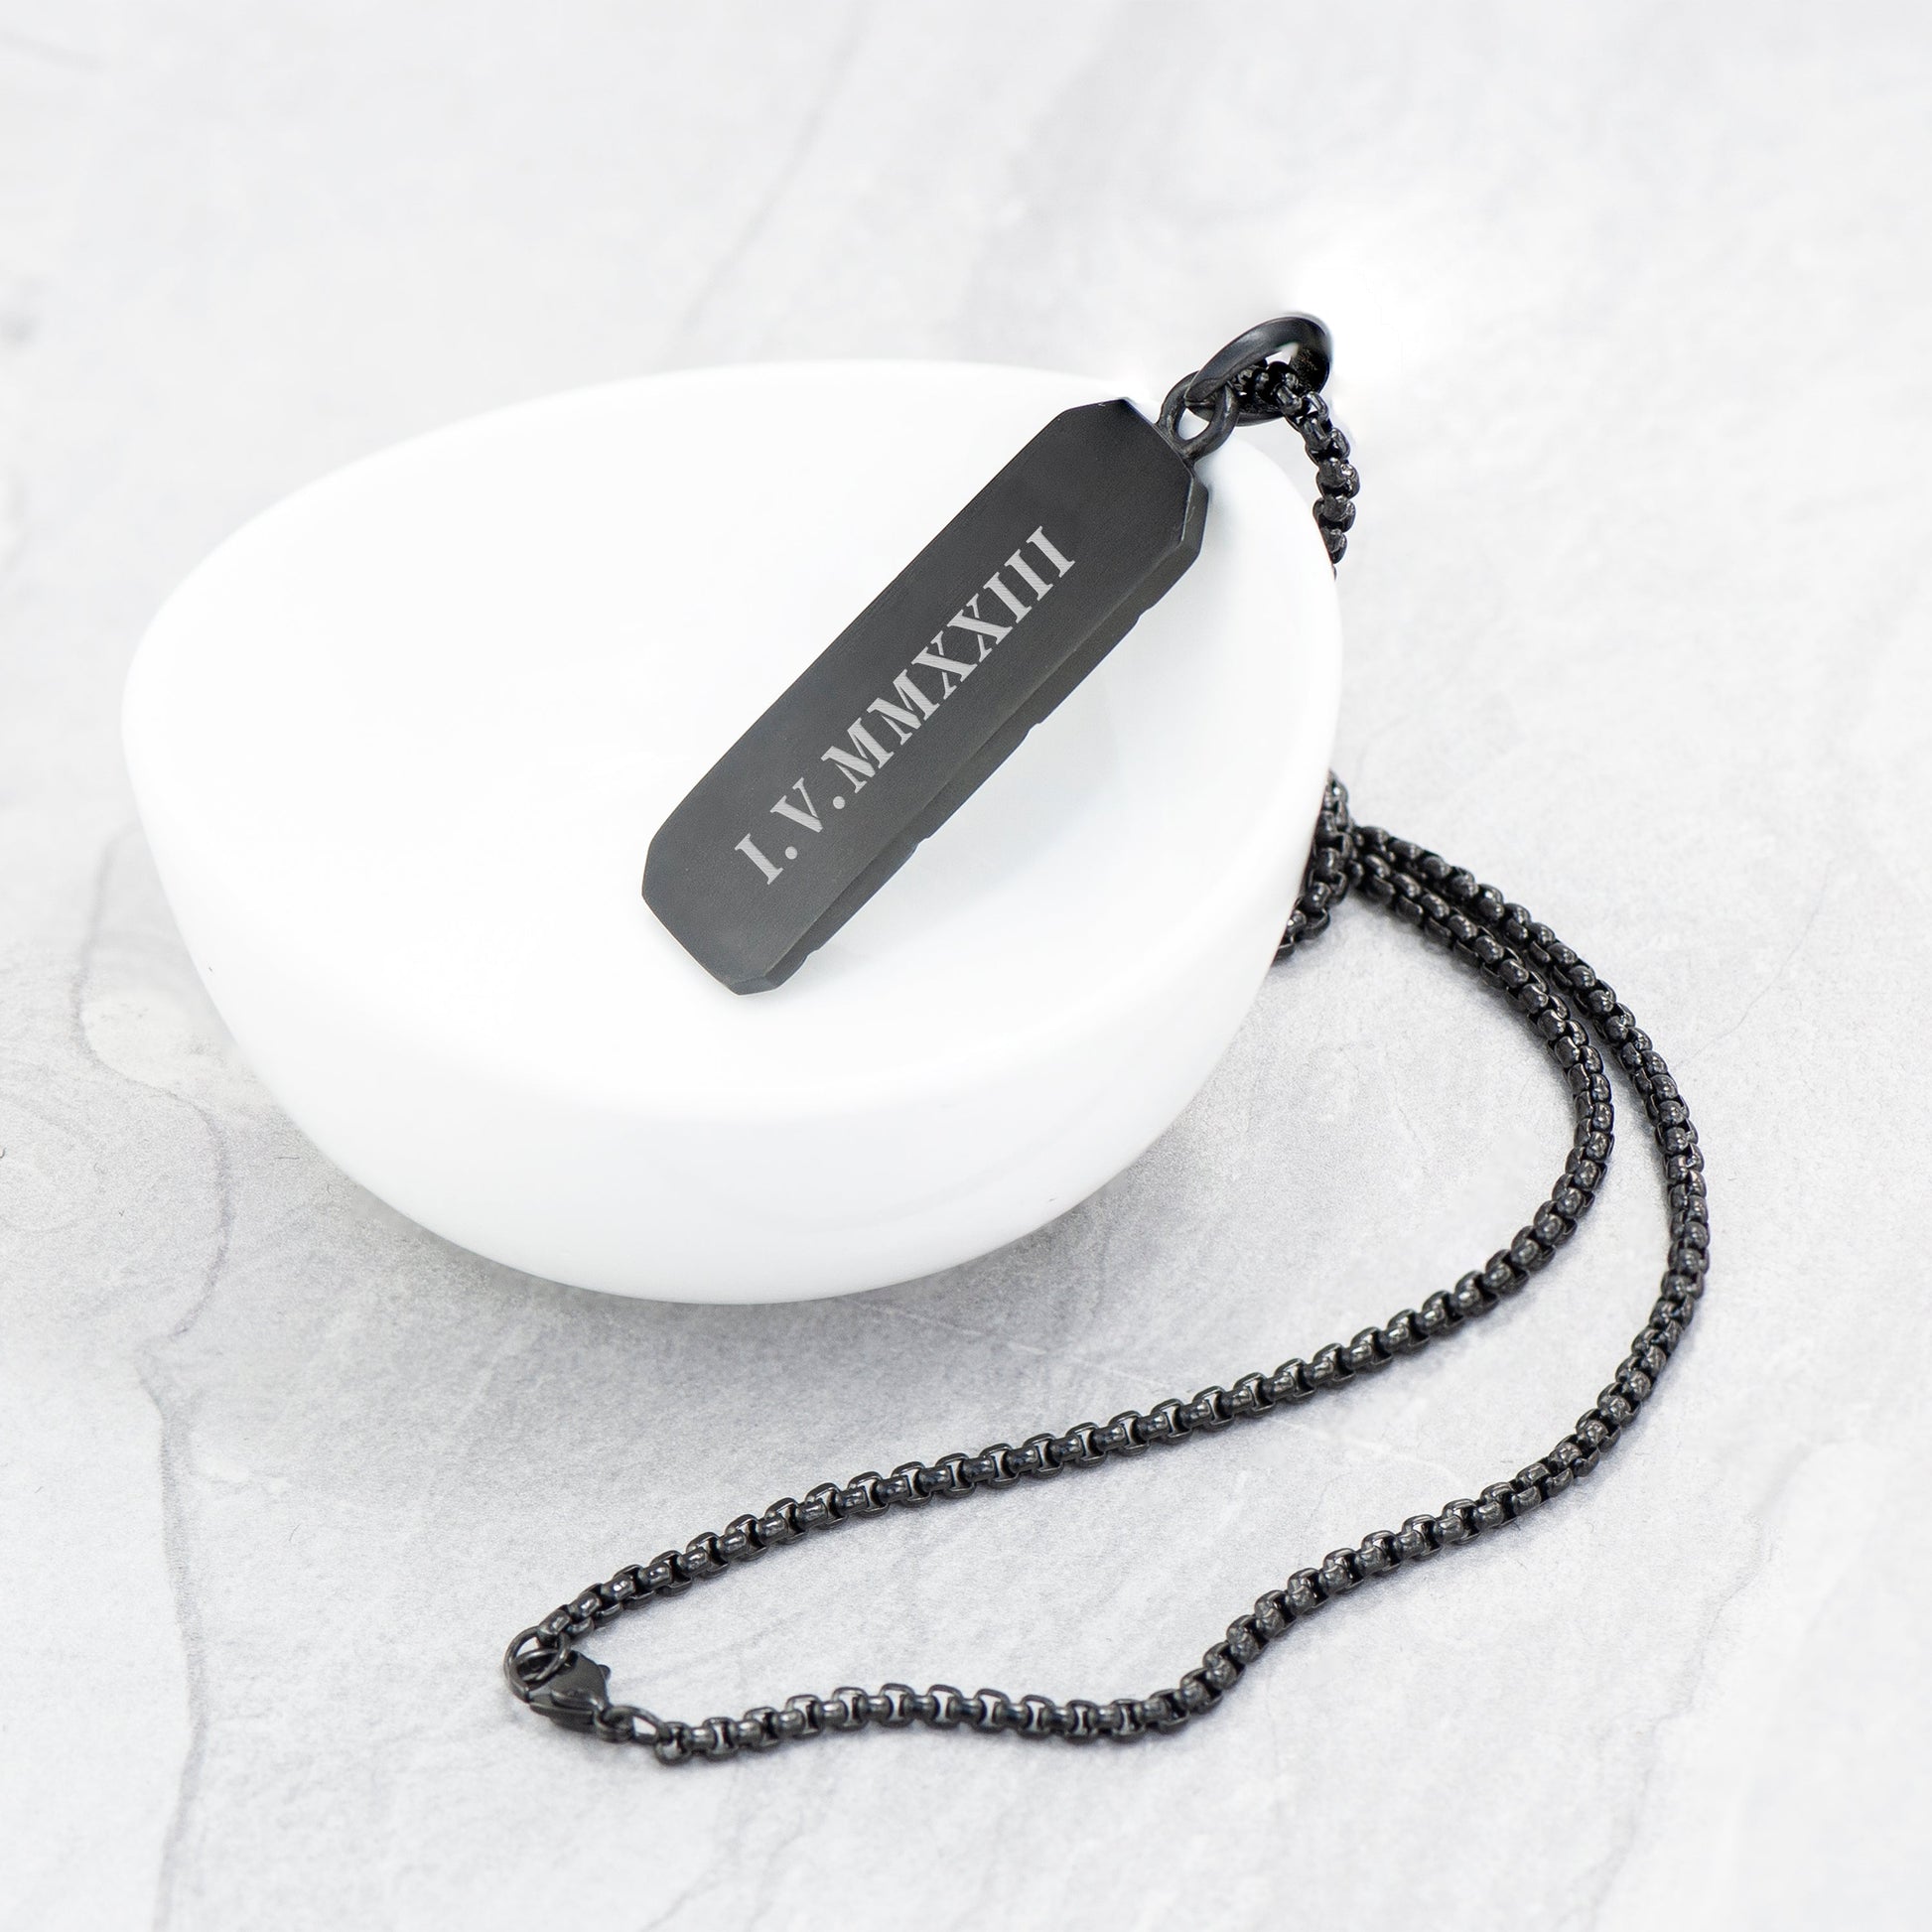 Personalized men's necklaces - Personalized Men's Black Steel Dog Tag Necklace 